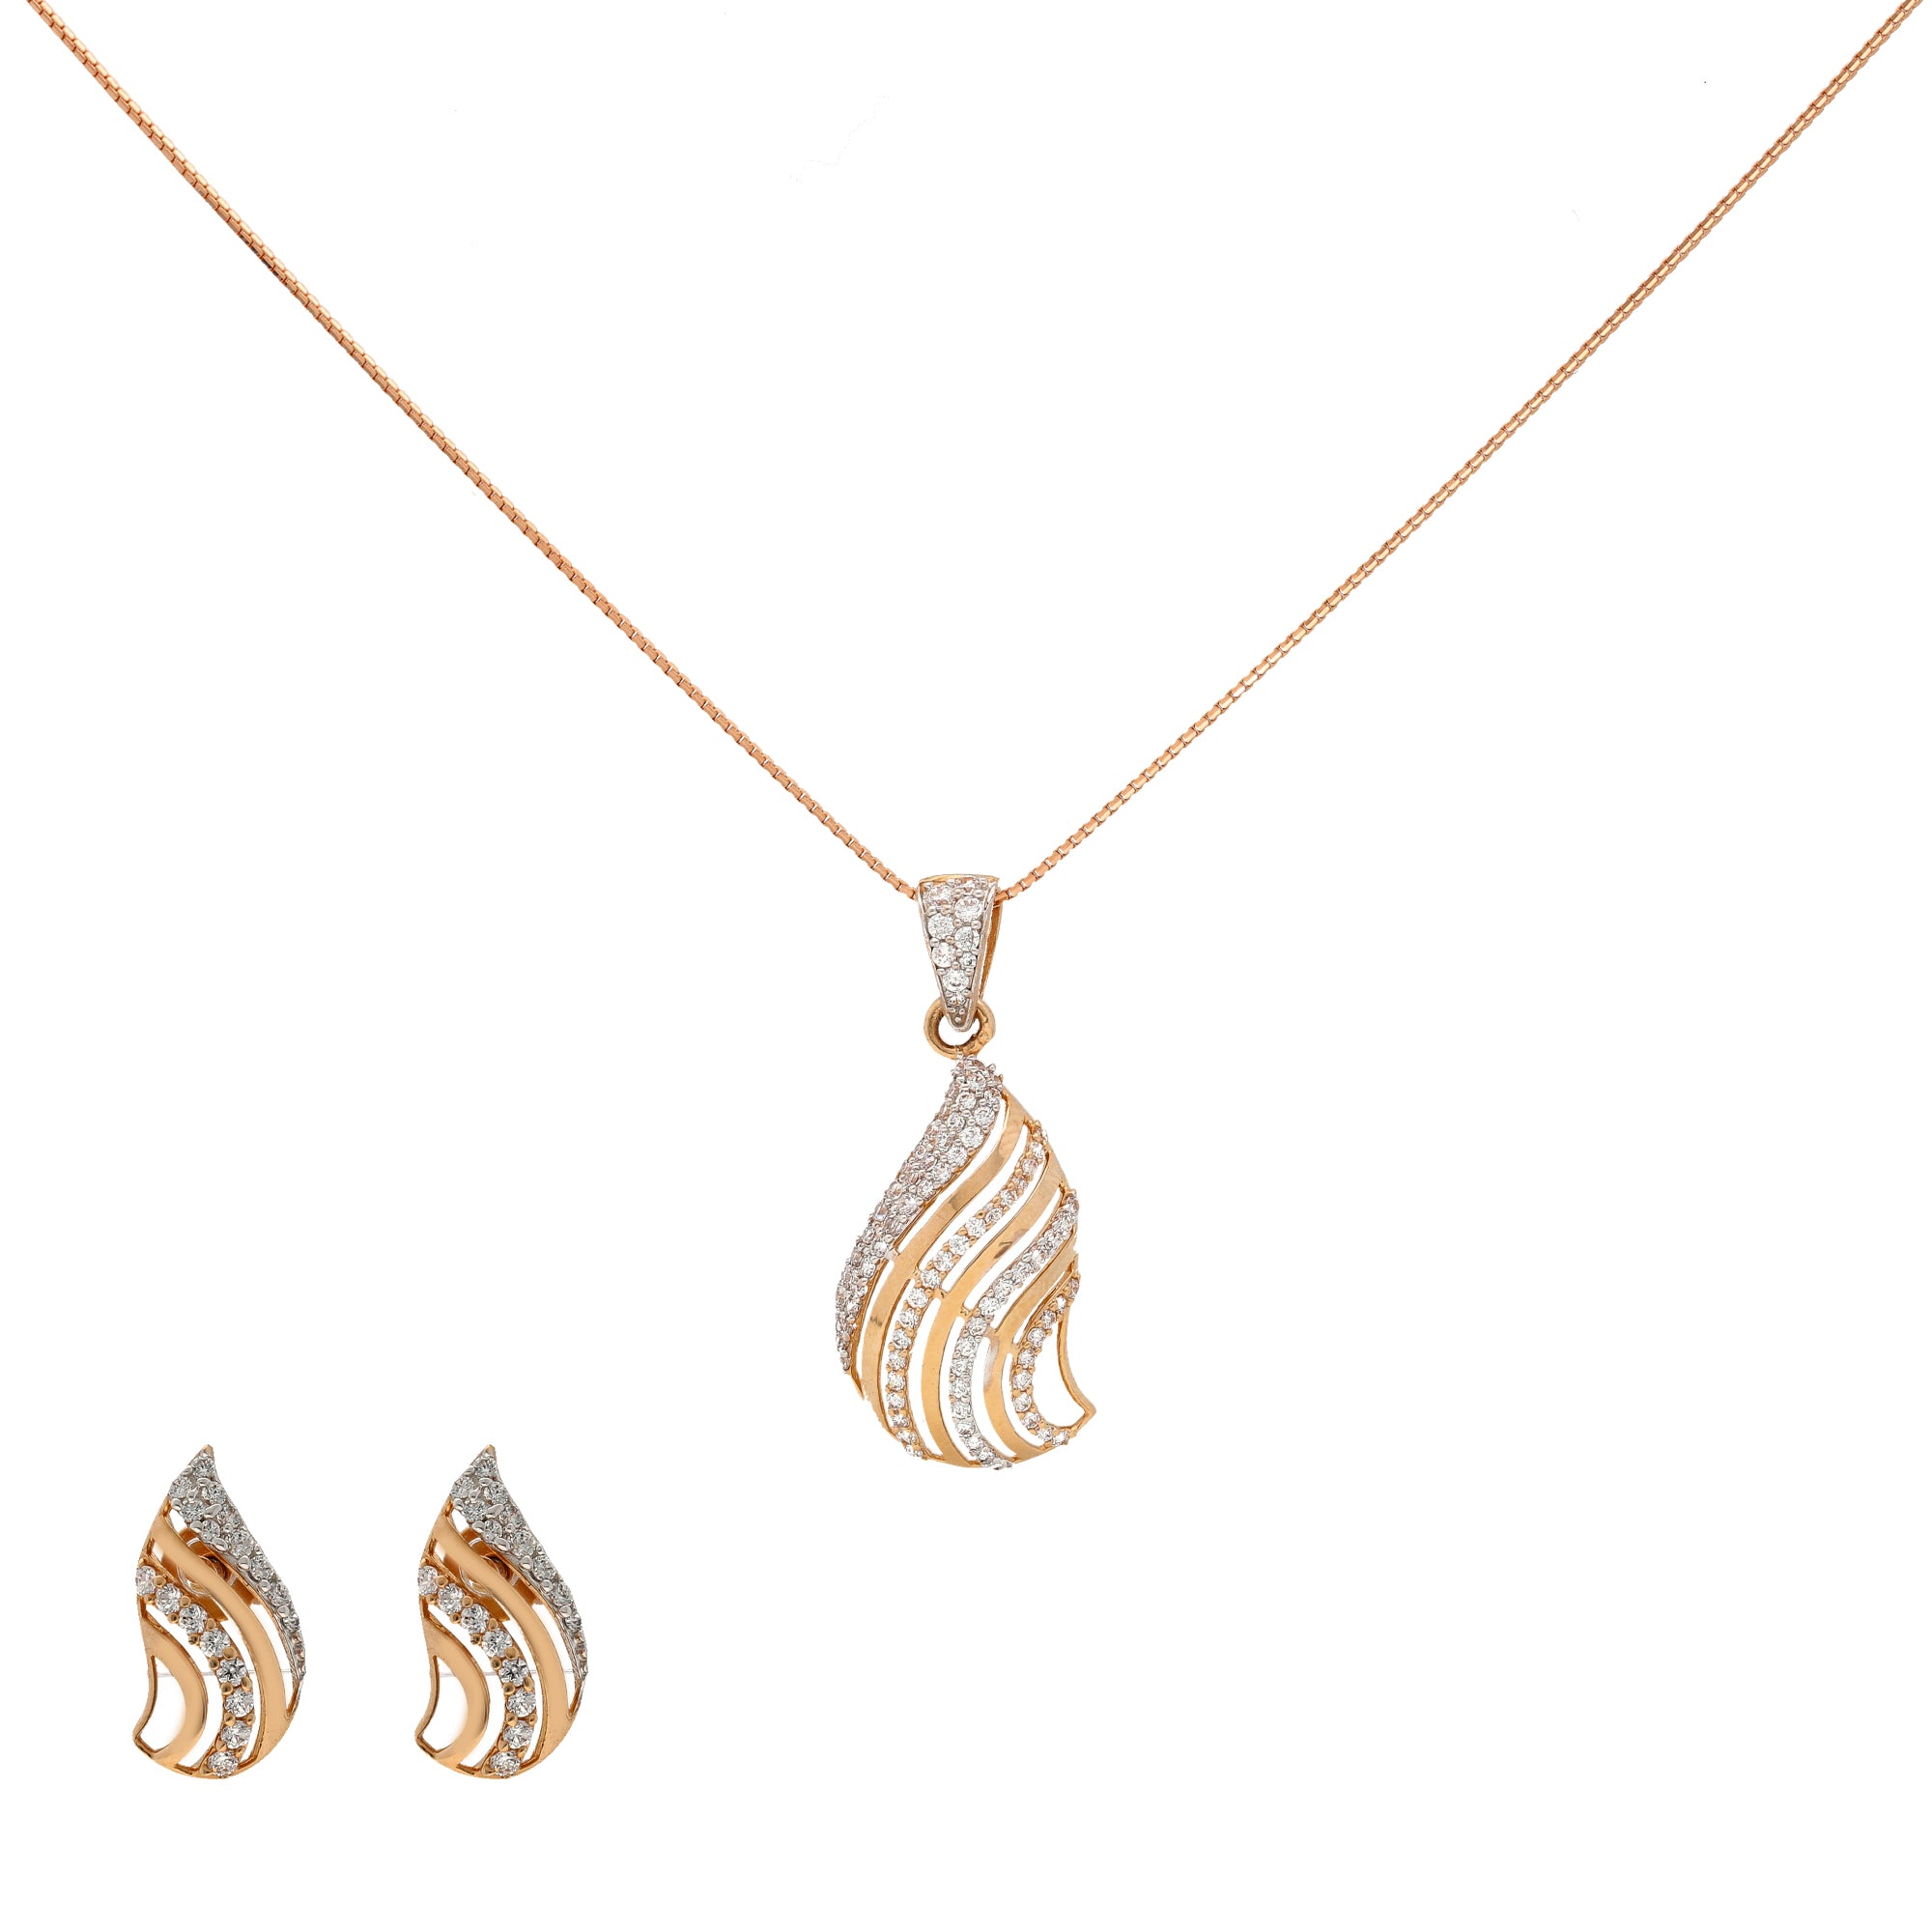 Buy Shyamrut Rose Gold Pendant Earring Chain Jewellery Set for Girls and  Women at Amazon.in